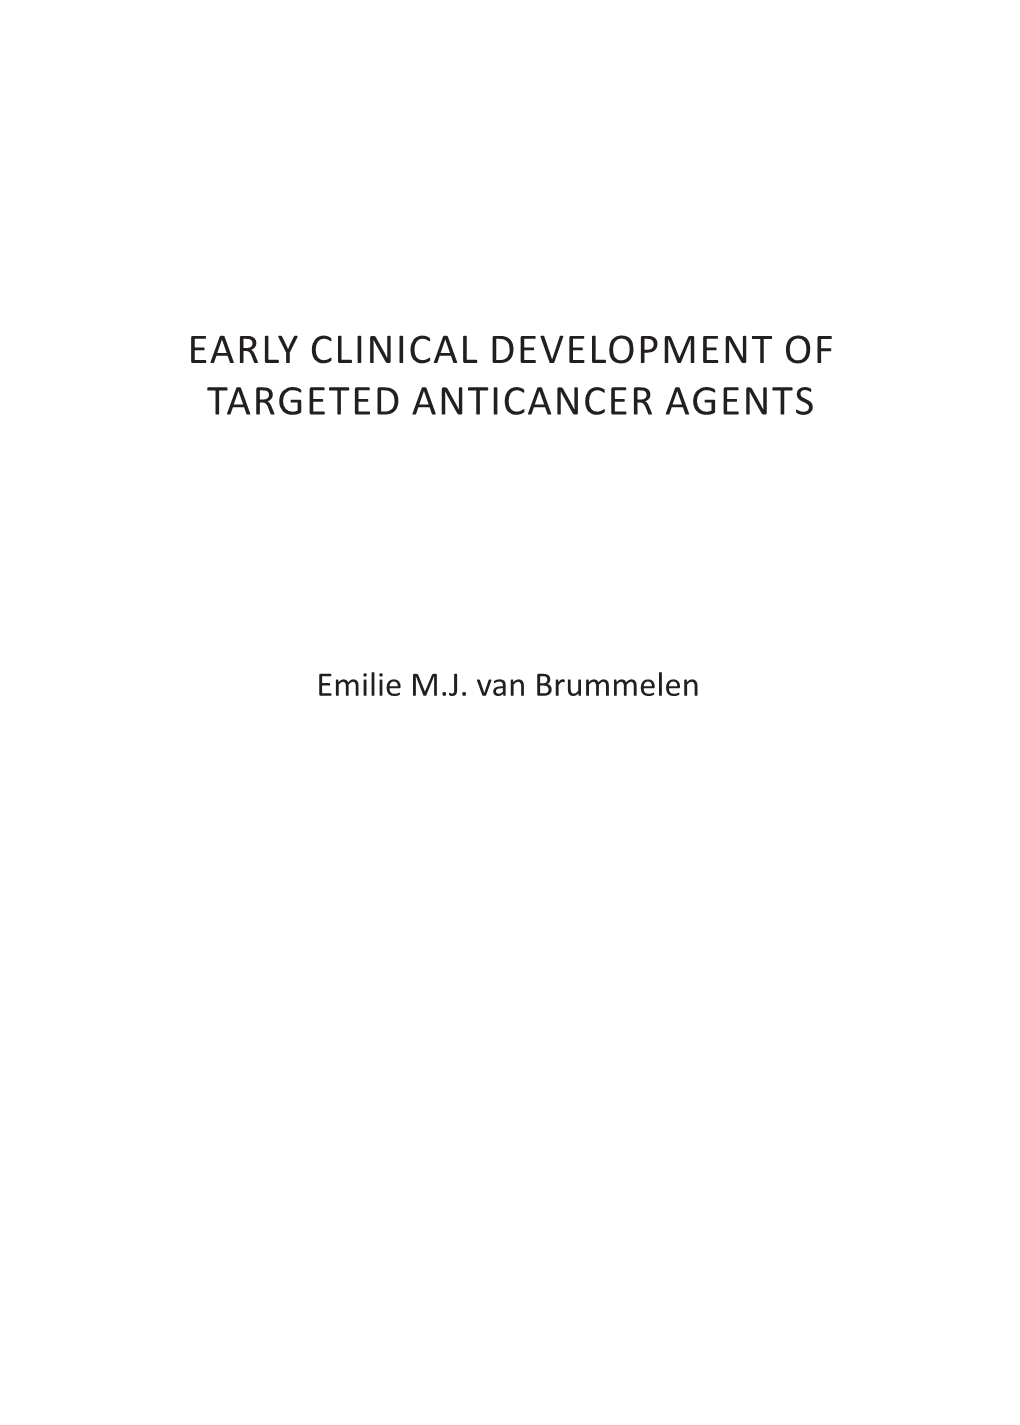 Early Clinical Development of Targeted Anticancer Agents